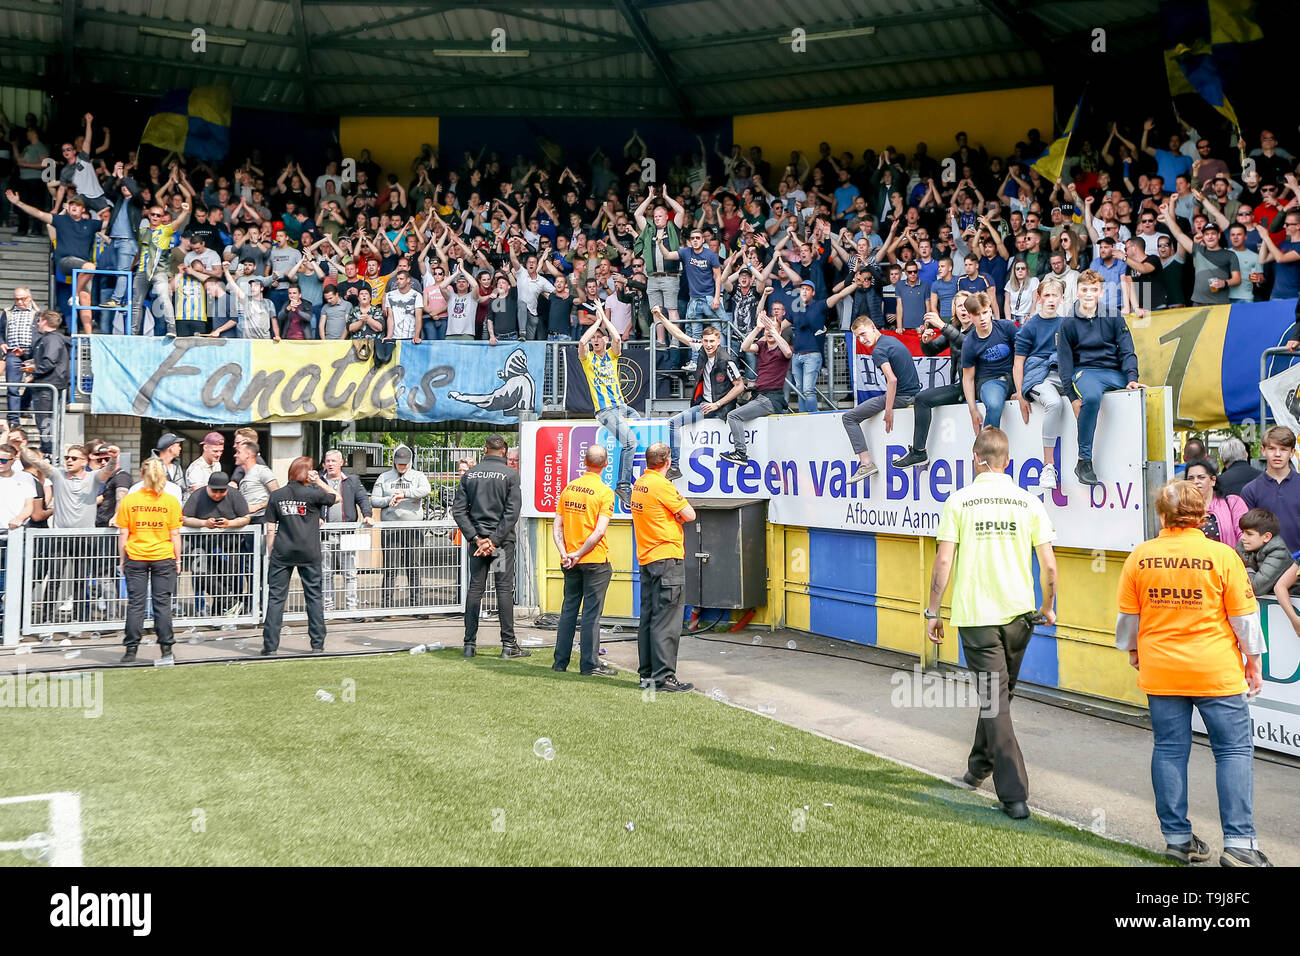 waalwijk 19 05 2019 mandemakers stadion keuken kampioen divisie rkc excelsior play off play off season 2018 2019 rkc fans celebrating the win during the match rkc excelsior play off 2 1 stock photo alamy